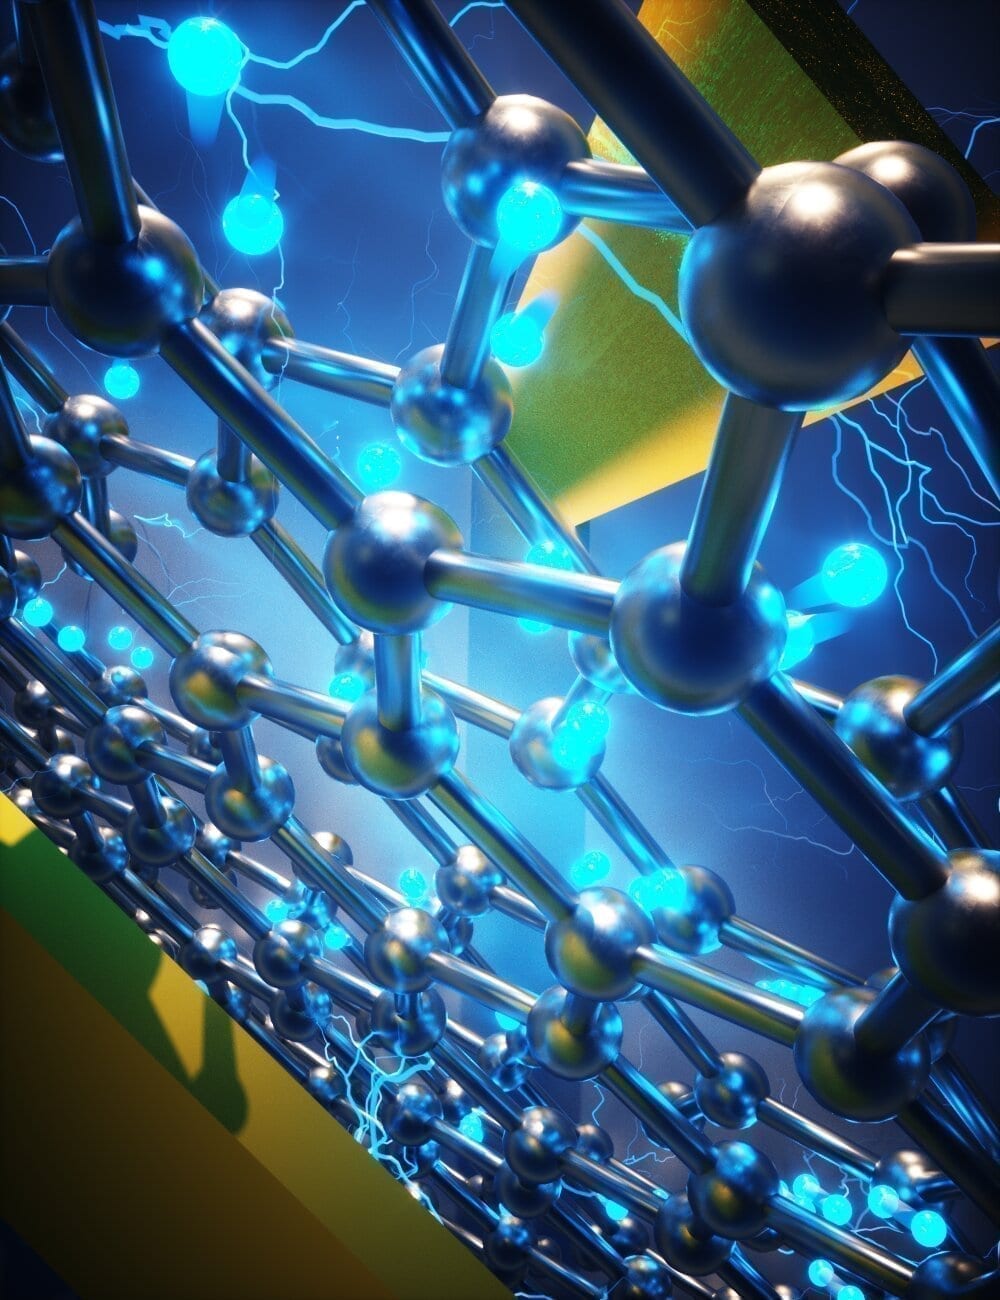 Magic angle graphene is the most versatile of all superconducting materials and yields three useful electronic devices